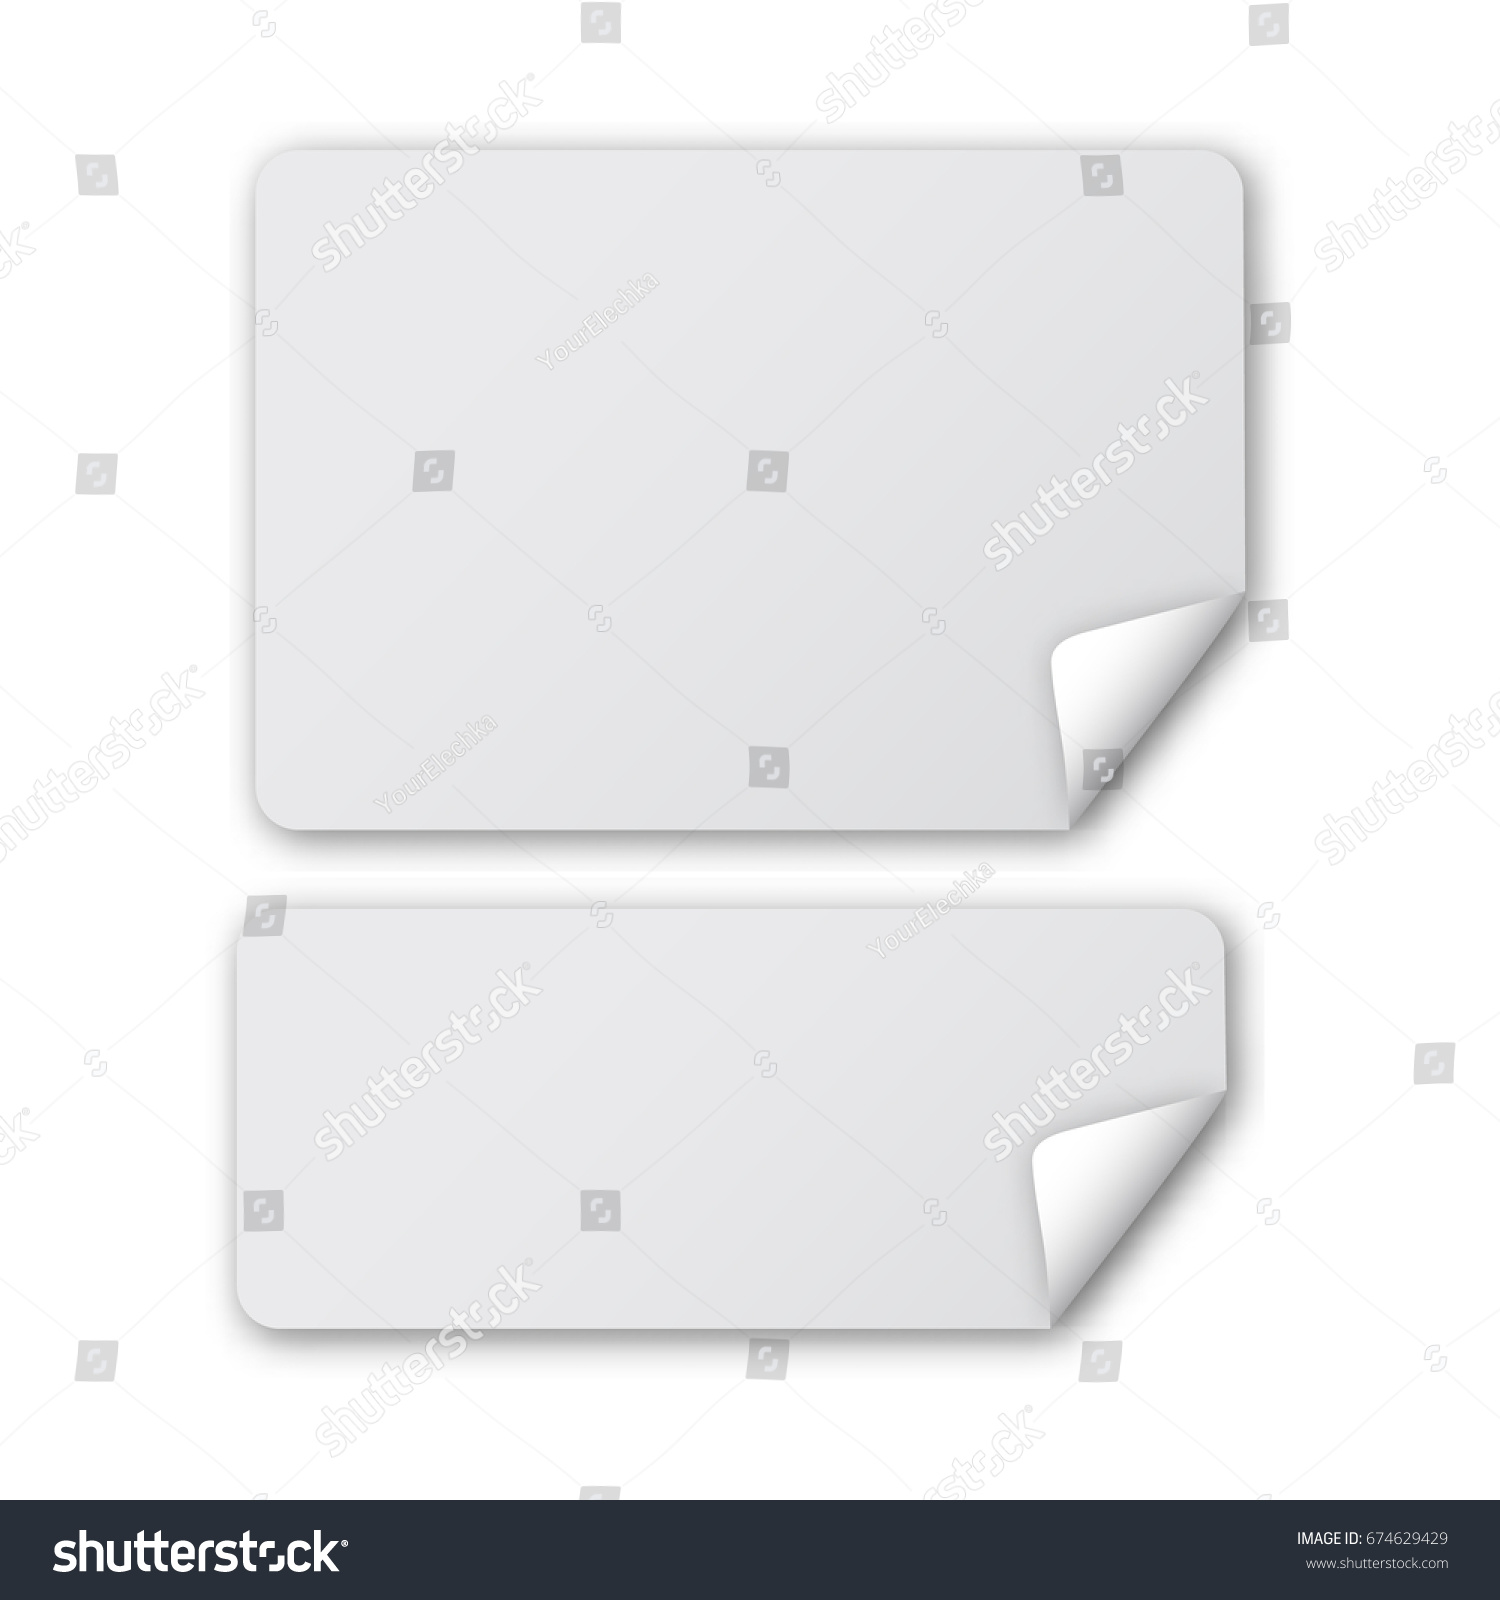 Rounded rectangle peel off papers with realistic shadow. Web banner template with curled corner. Vector illustration isolated on white background. #674629429